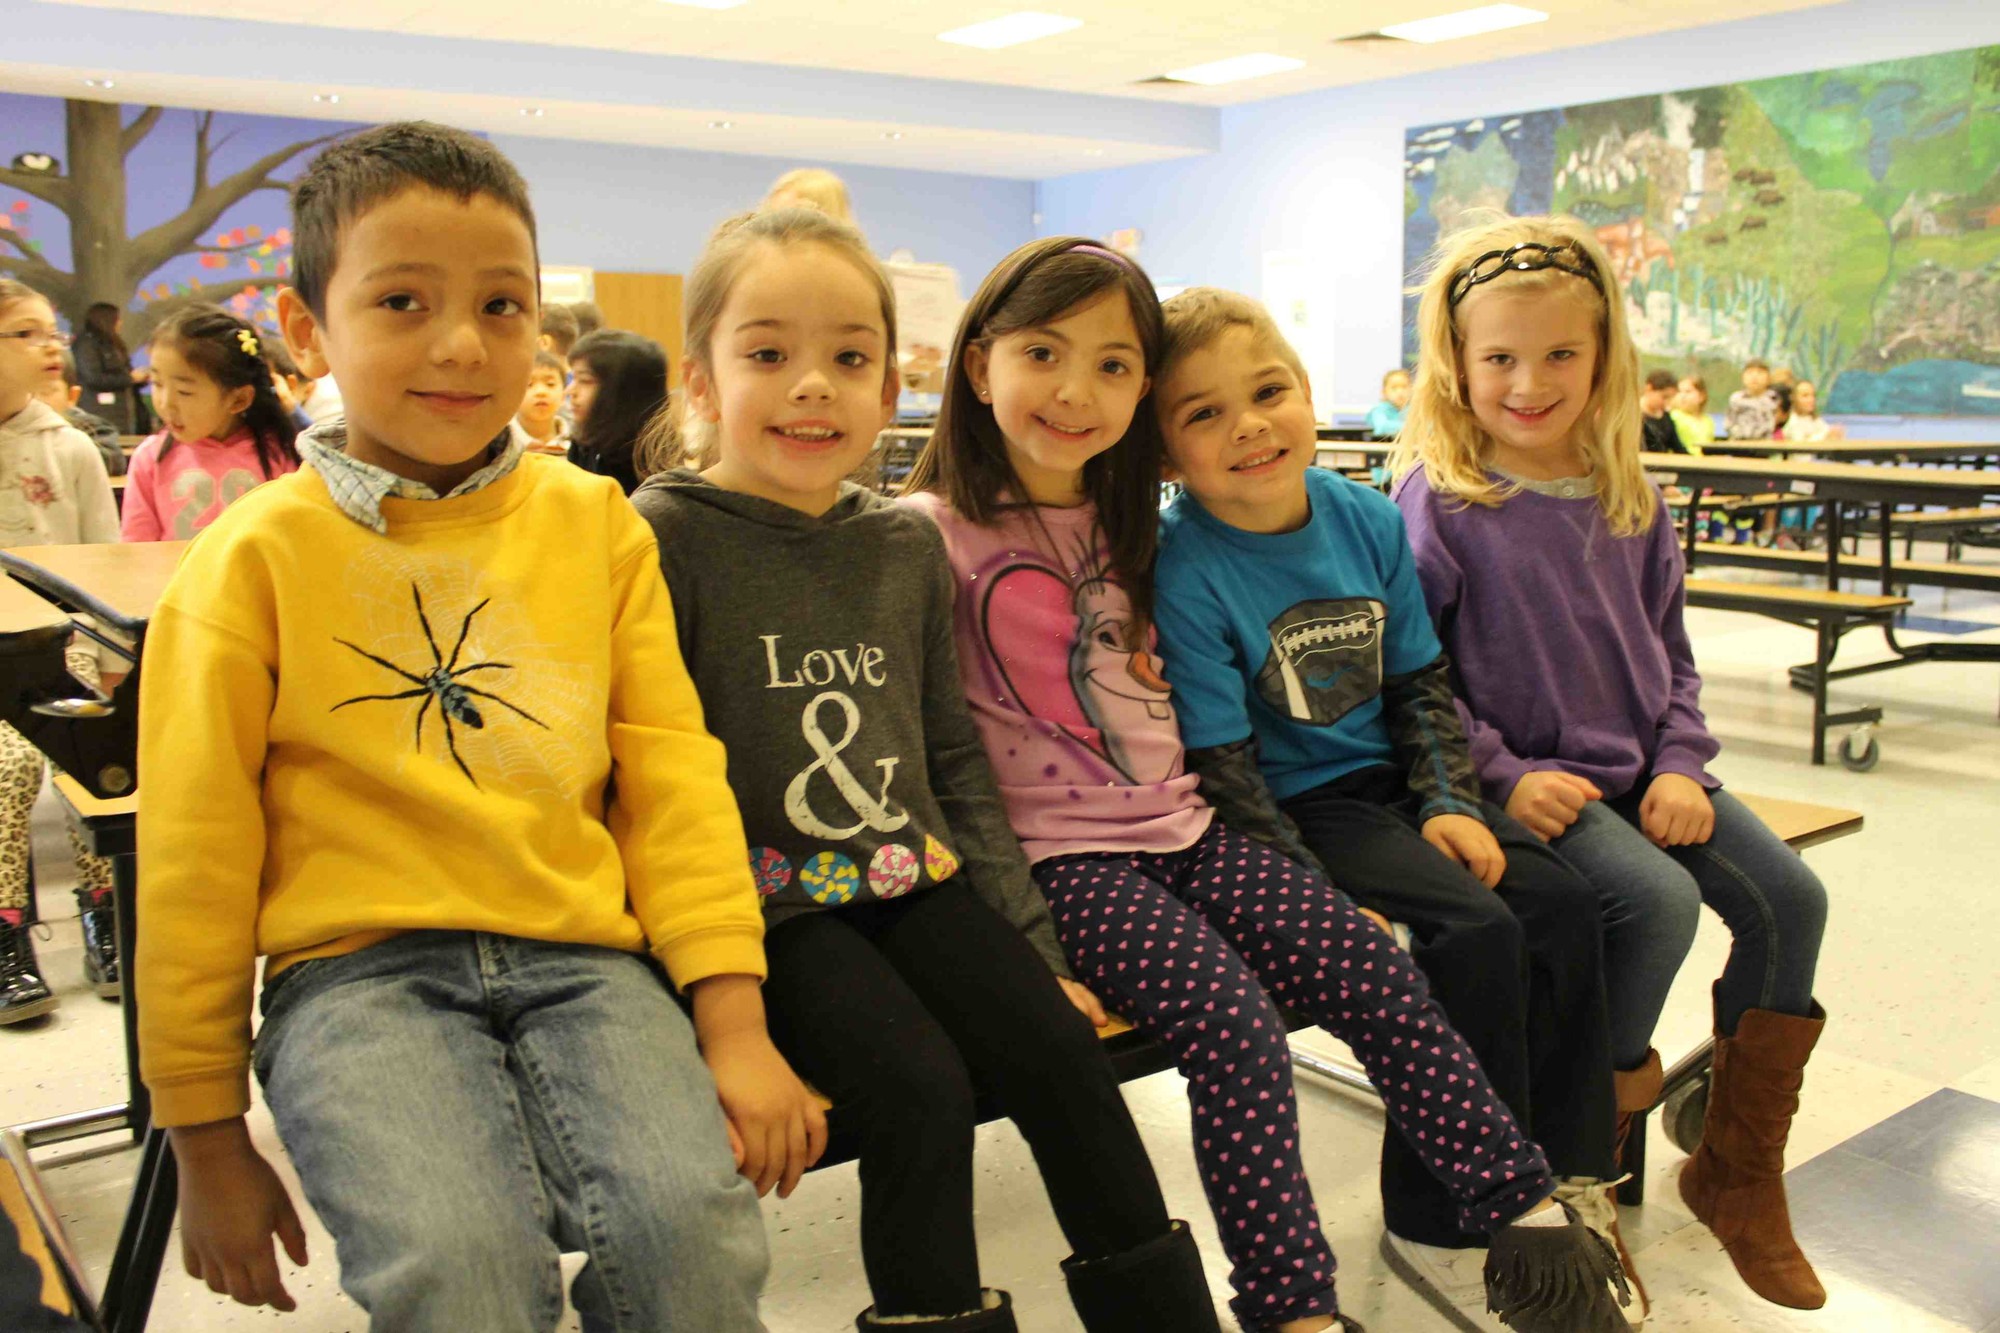 East Meadow’s kindergarten program will be getting a new look this school year, as it expands from half-day to full-day. Above, Parkway Elementary School kindergartners last year during a school assembly.